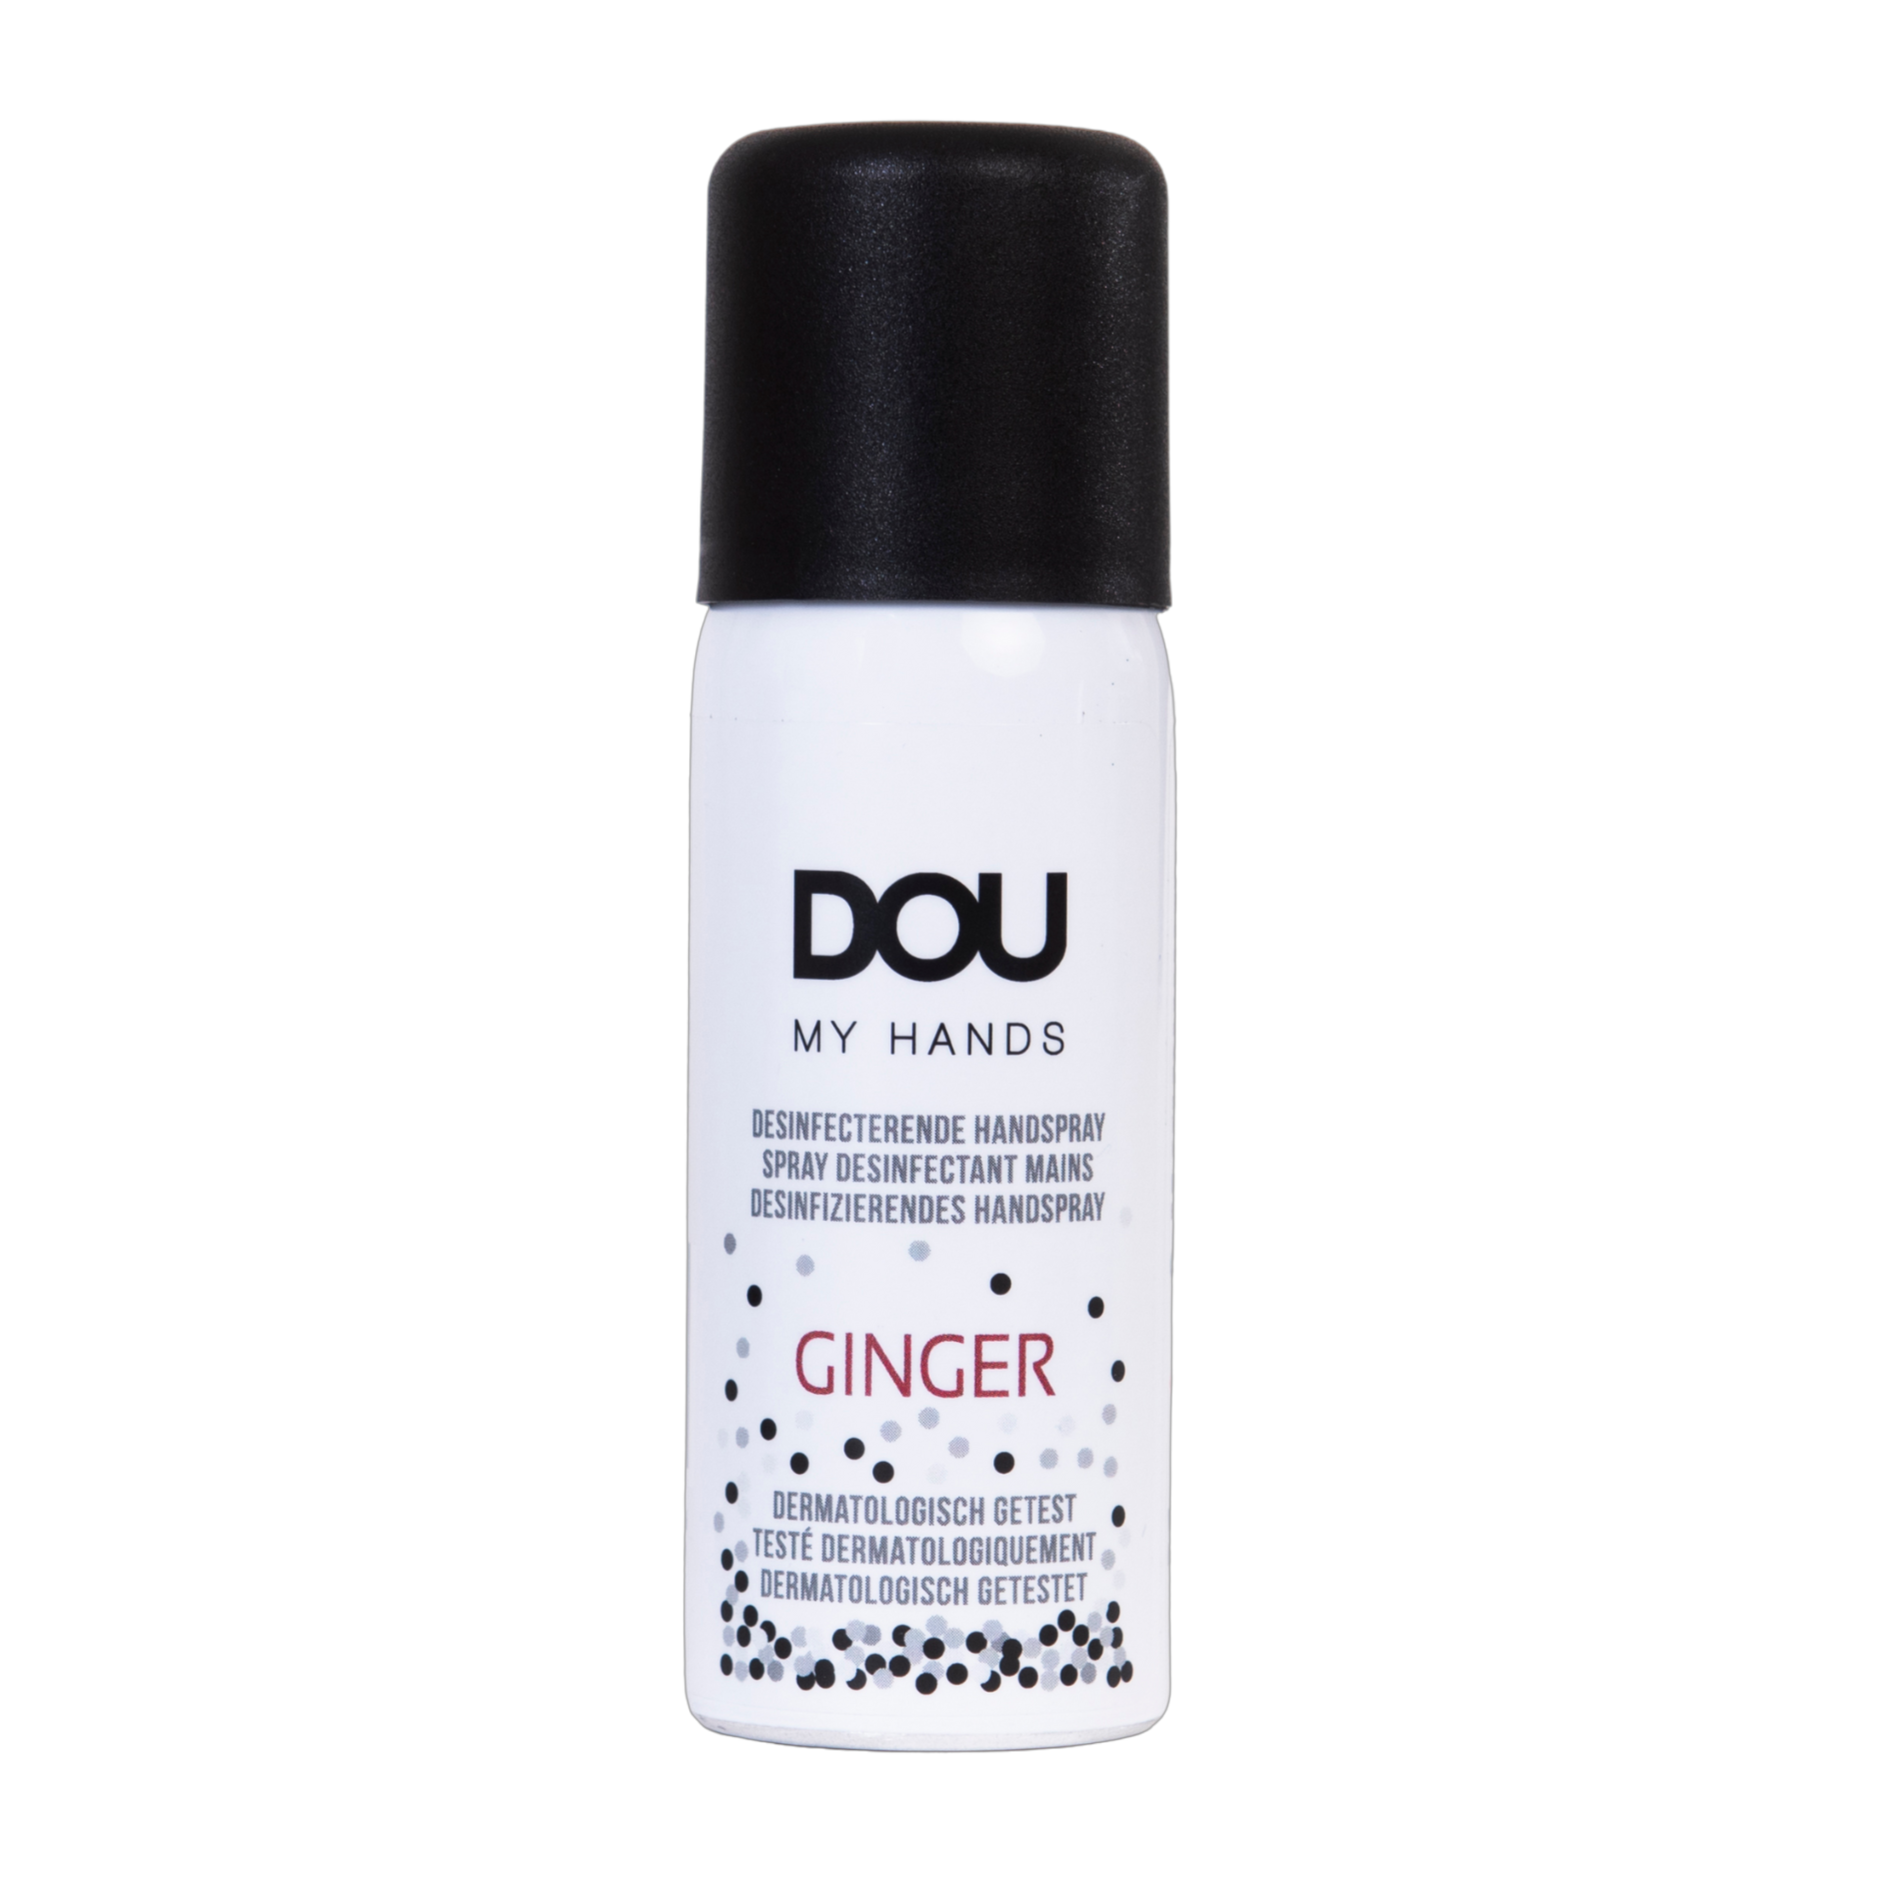 DOU My Hands on-the-go Spray Ginger